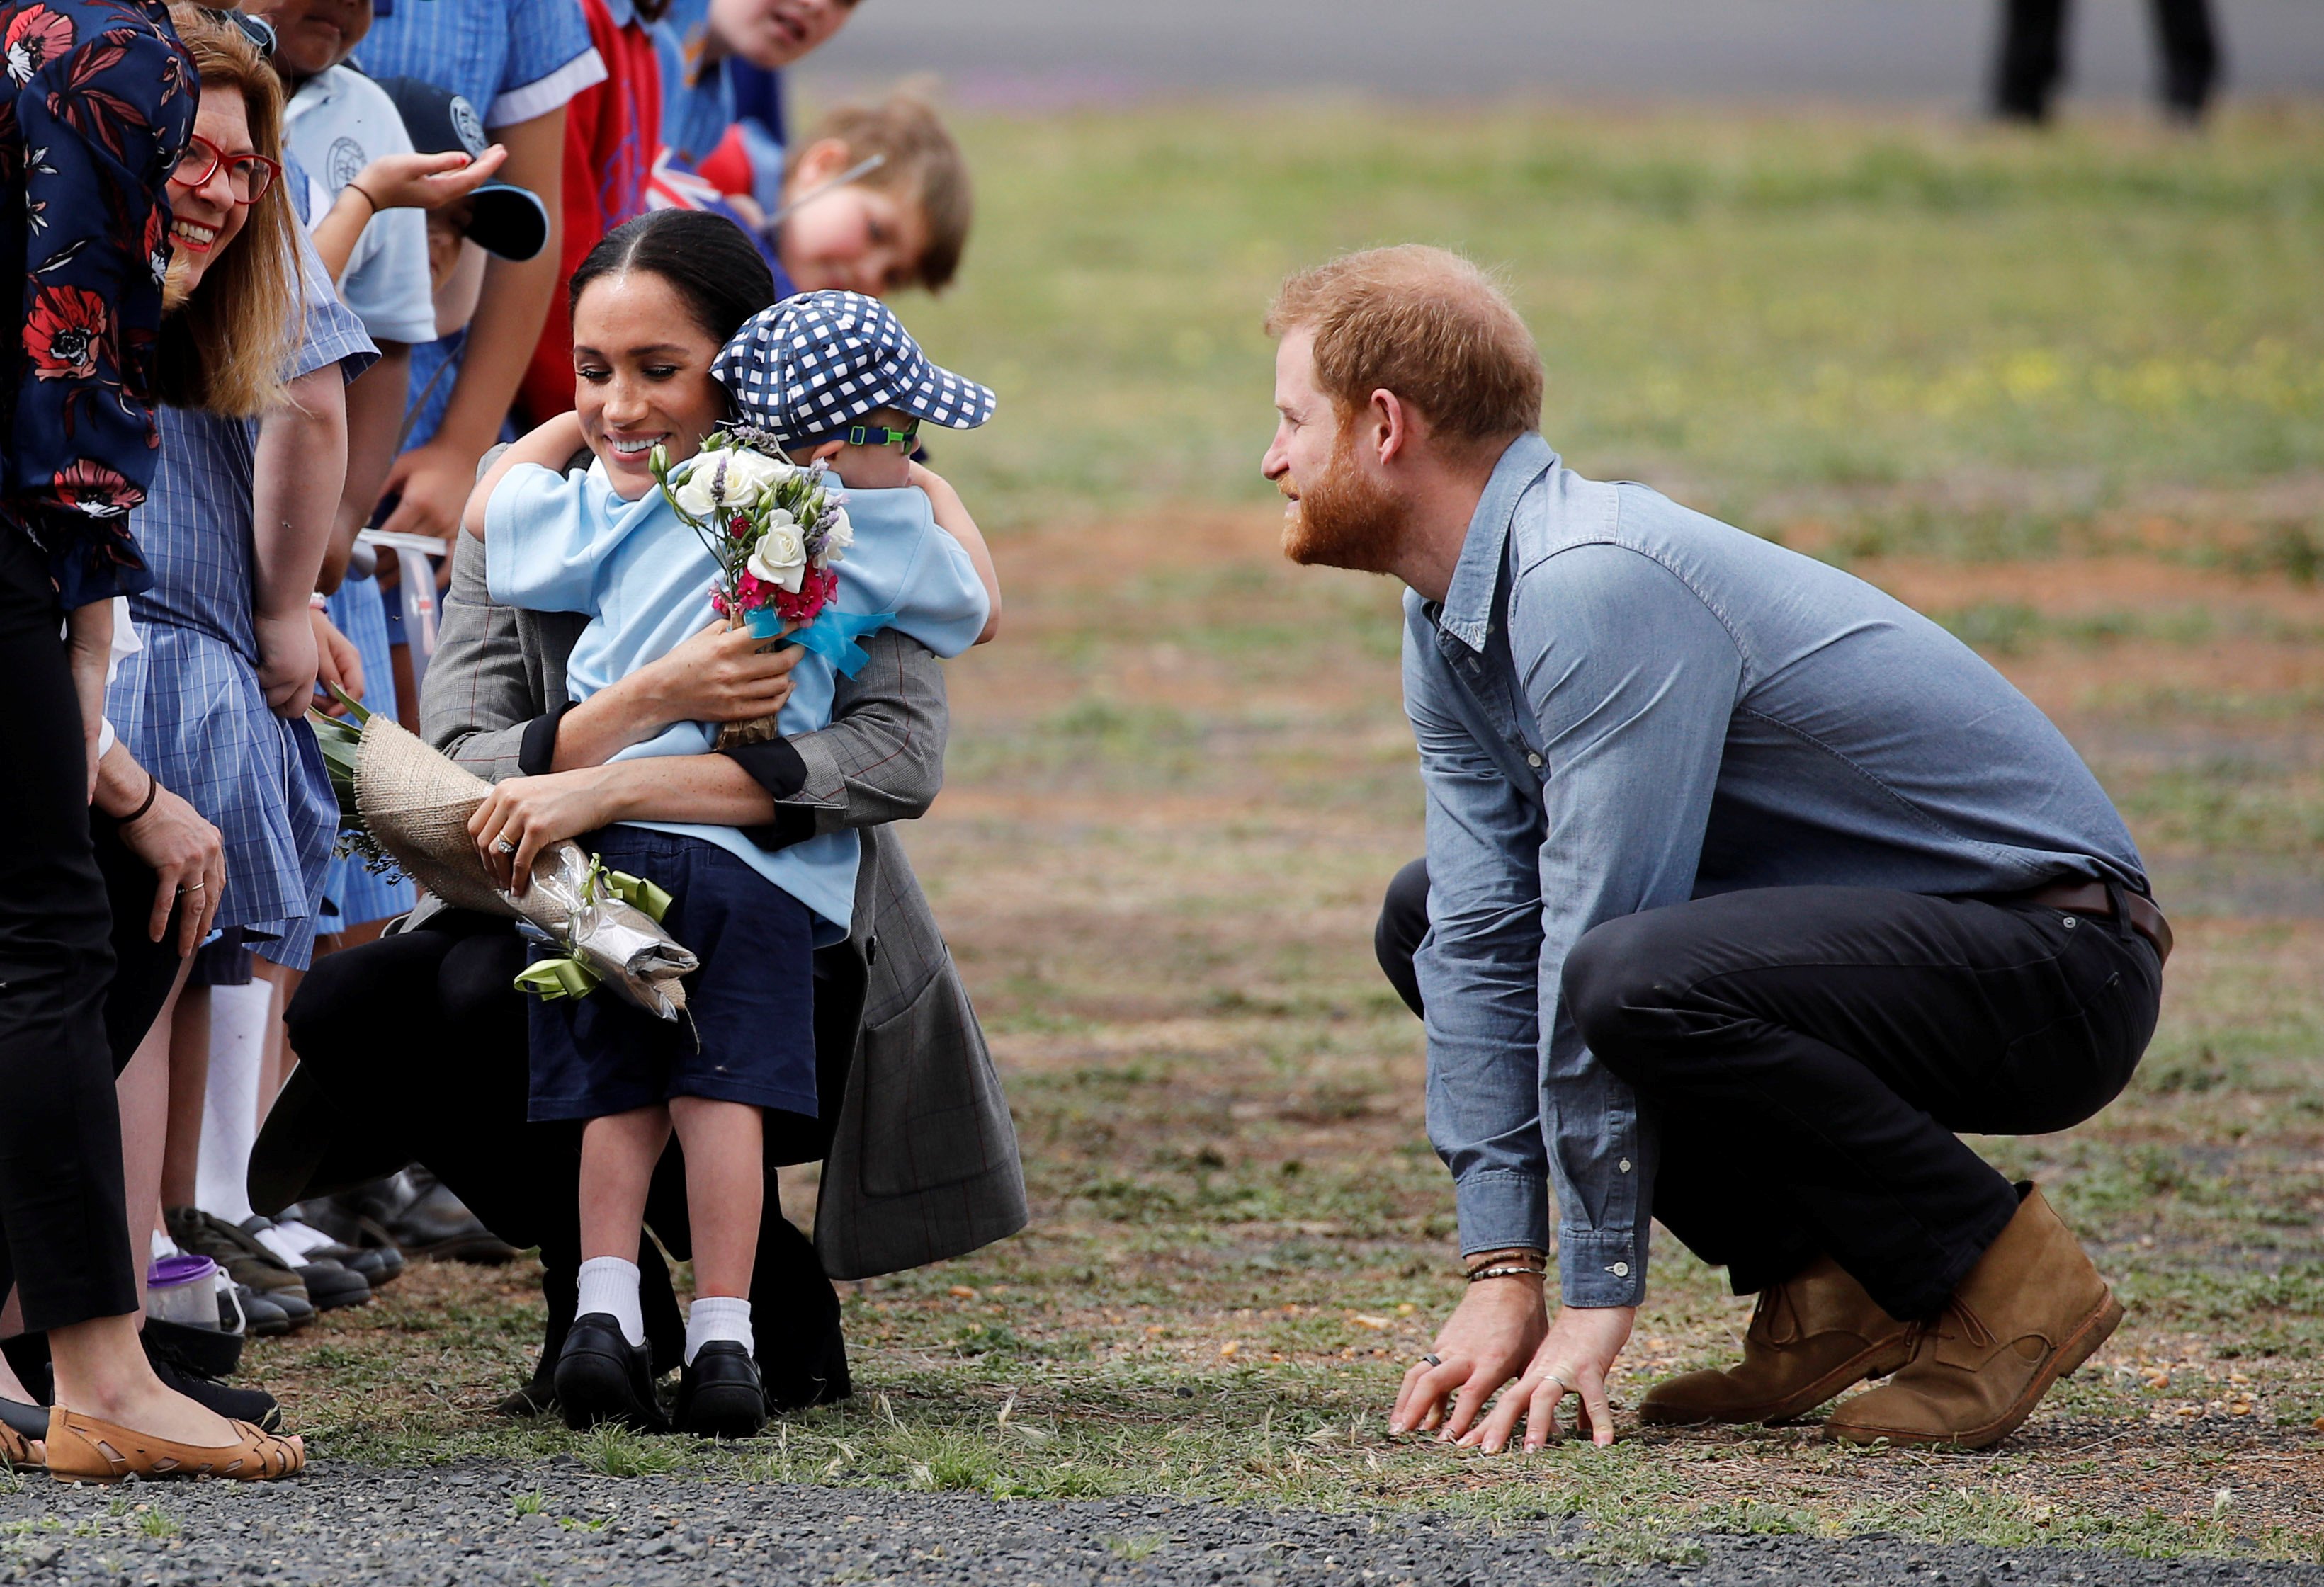 Prince Harry, Duke of Sussex and Meghan, Duchess of Sussex are greeted by five-year-old Luke Vincent as they arrive at Dubbo Airport on October 17, 2018 in Dubbo, Australia | Source: Getty Images